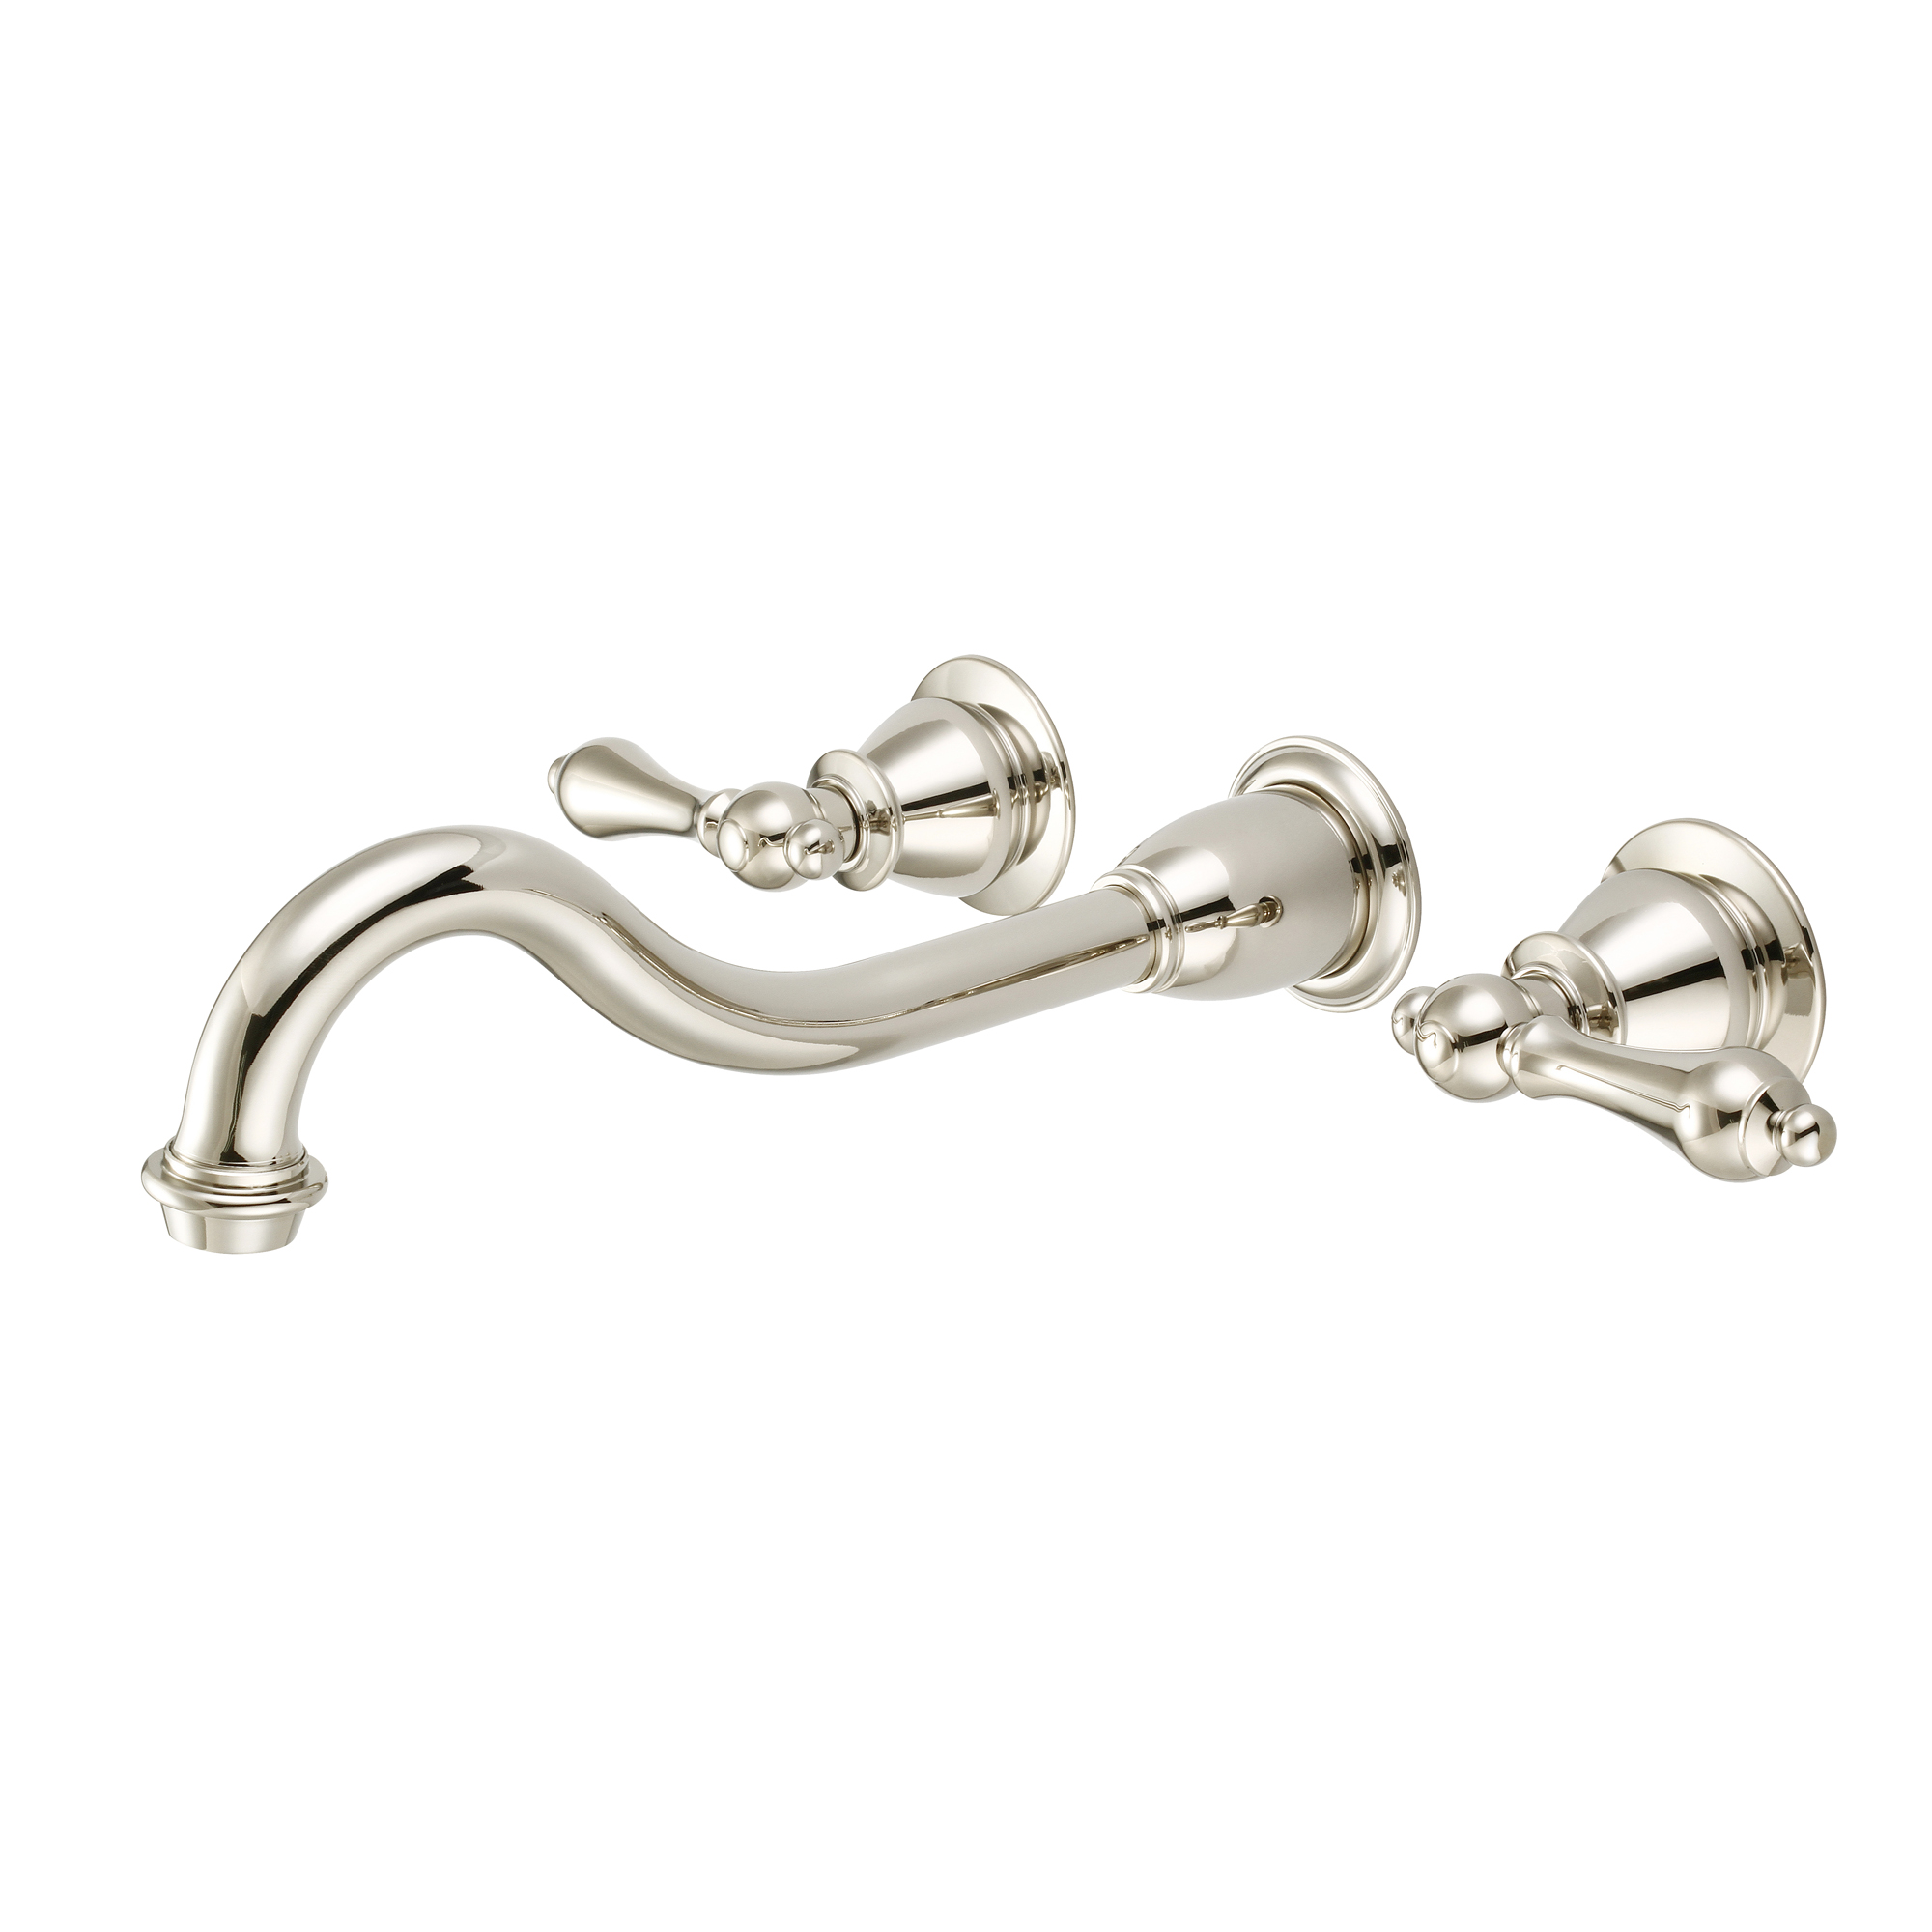 Elegant Spout Wall Mount Vessel/Lavatory Faucets in Polished Nickel (PVD) Finish With Metal Lever Handles Without Labels